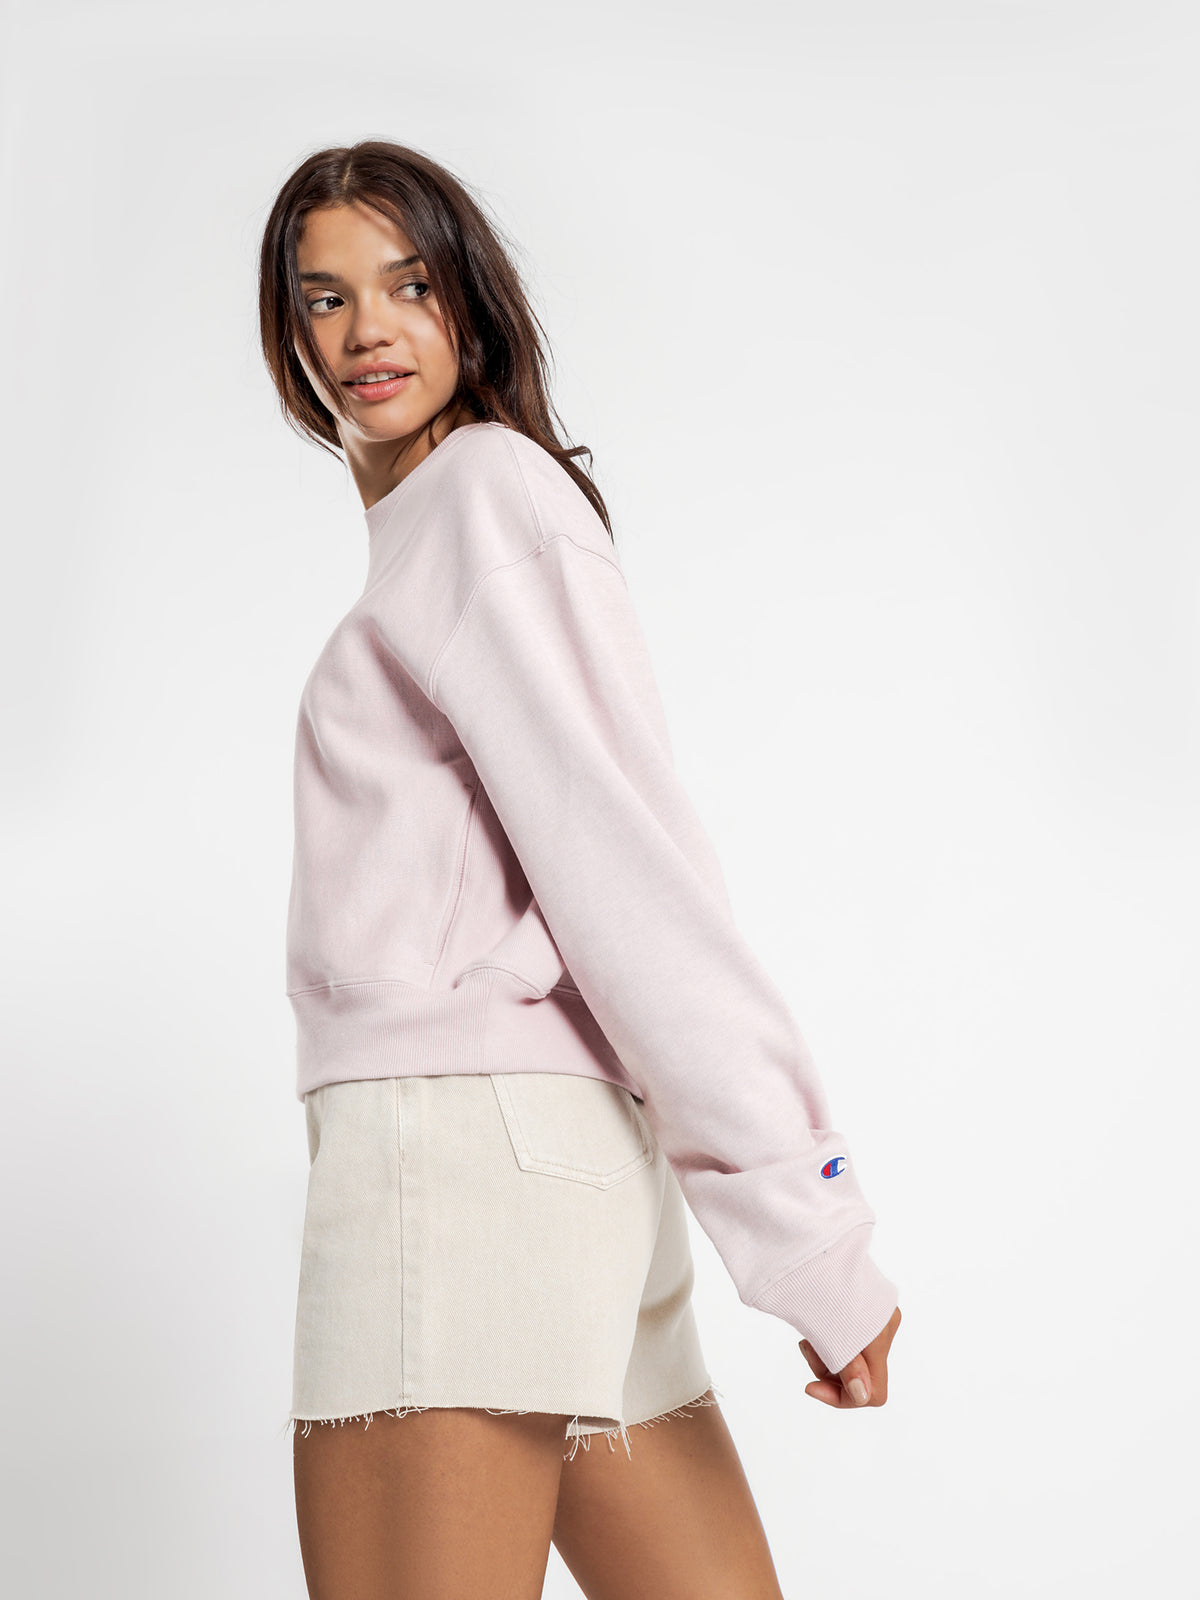 Reverse Weave Overdyed Crew Jumper in Hush Pink